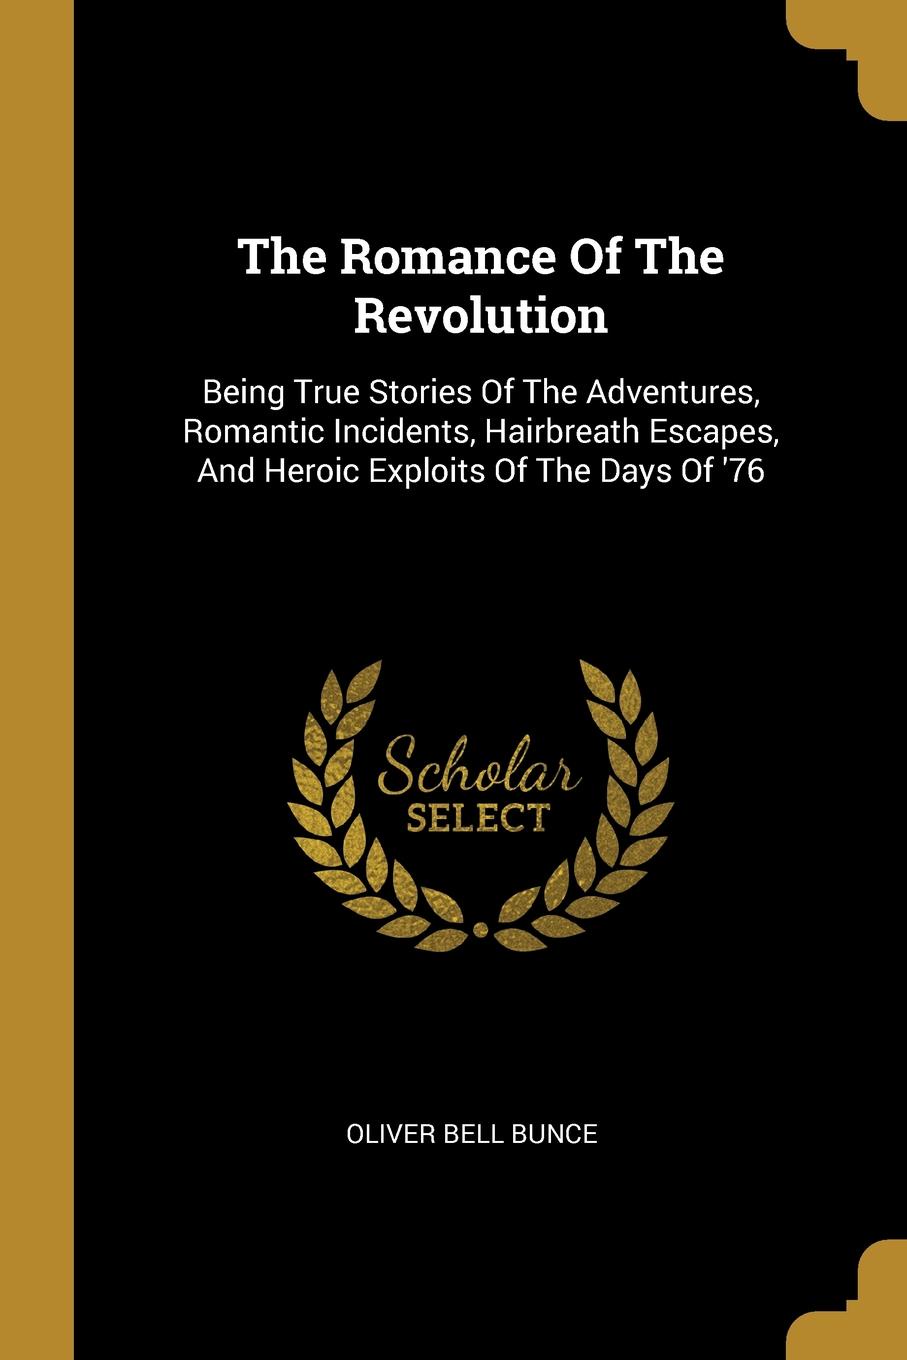 The Romance Of The Revolution. Being True Stories Of The Adventures, Romantic Incidents, Hairbreath Escapes, And Heroic Exploits Of The Days Of .76